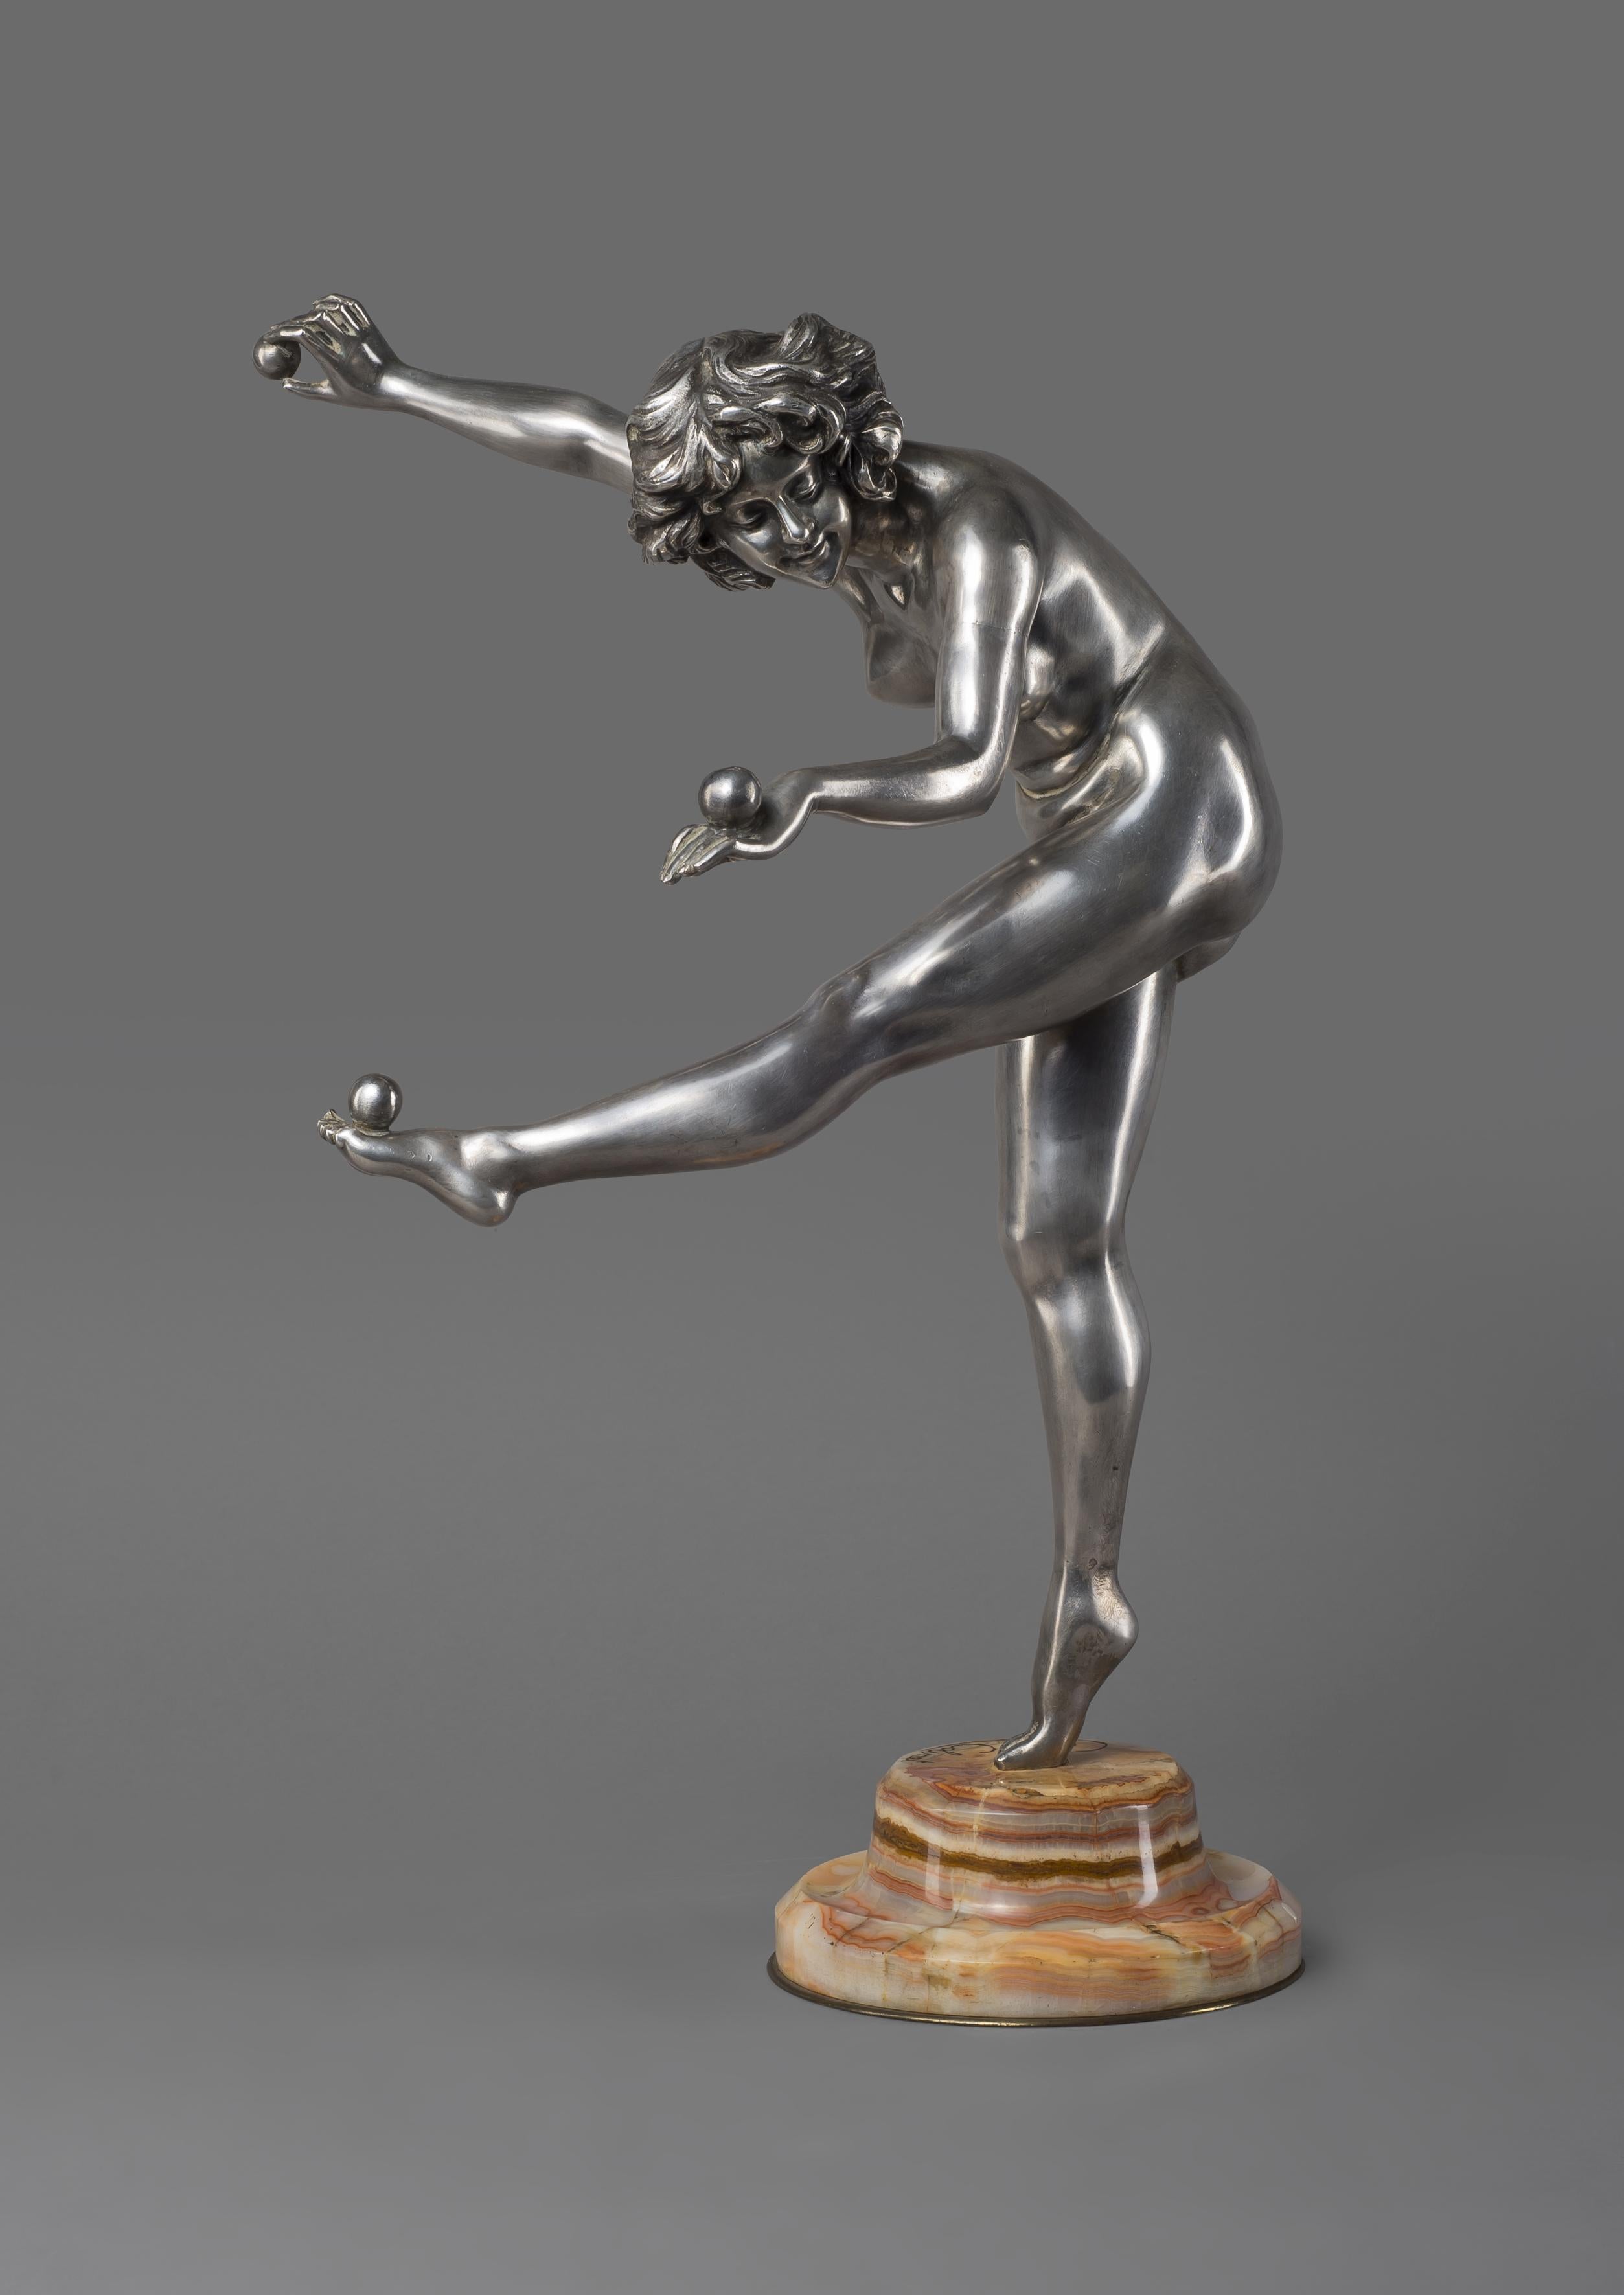 'The Juggler' - A fine Art Deco silvered bronze figure, by Claire J. R. Colinet. 

French, circa 1925. 

Engraved to base 'CL J.R. Colinet'.

This dramatic and large silvered bronze figure by Colinet depicts a nude female figure in an elegant